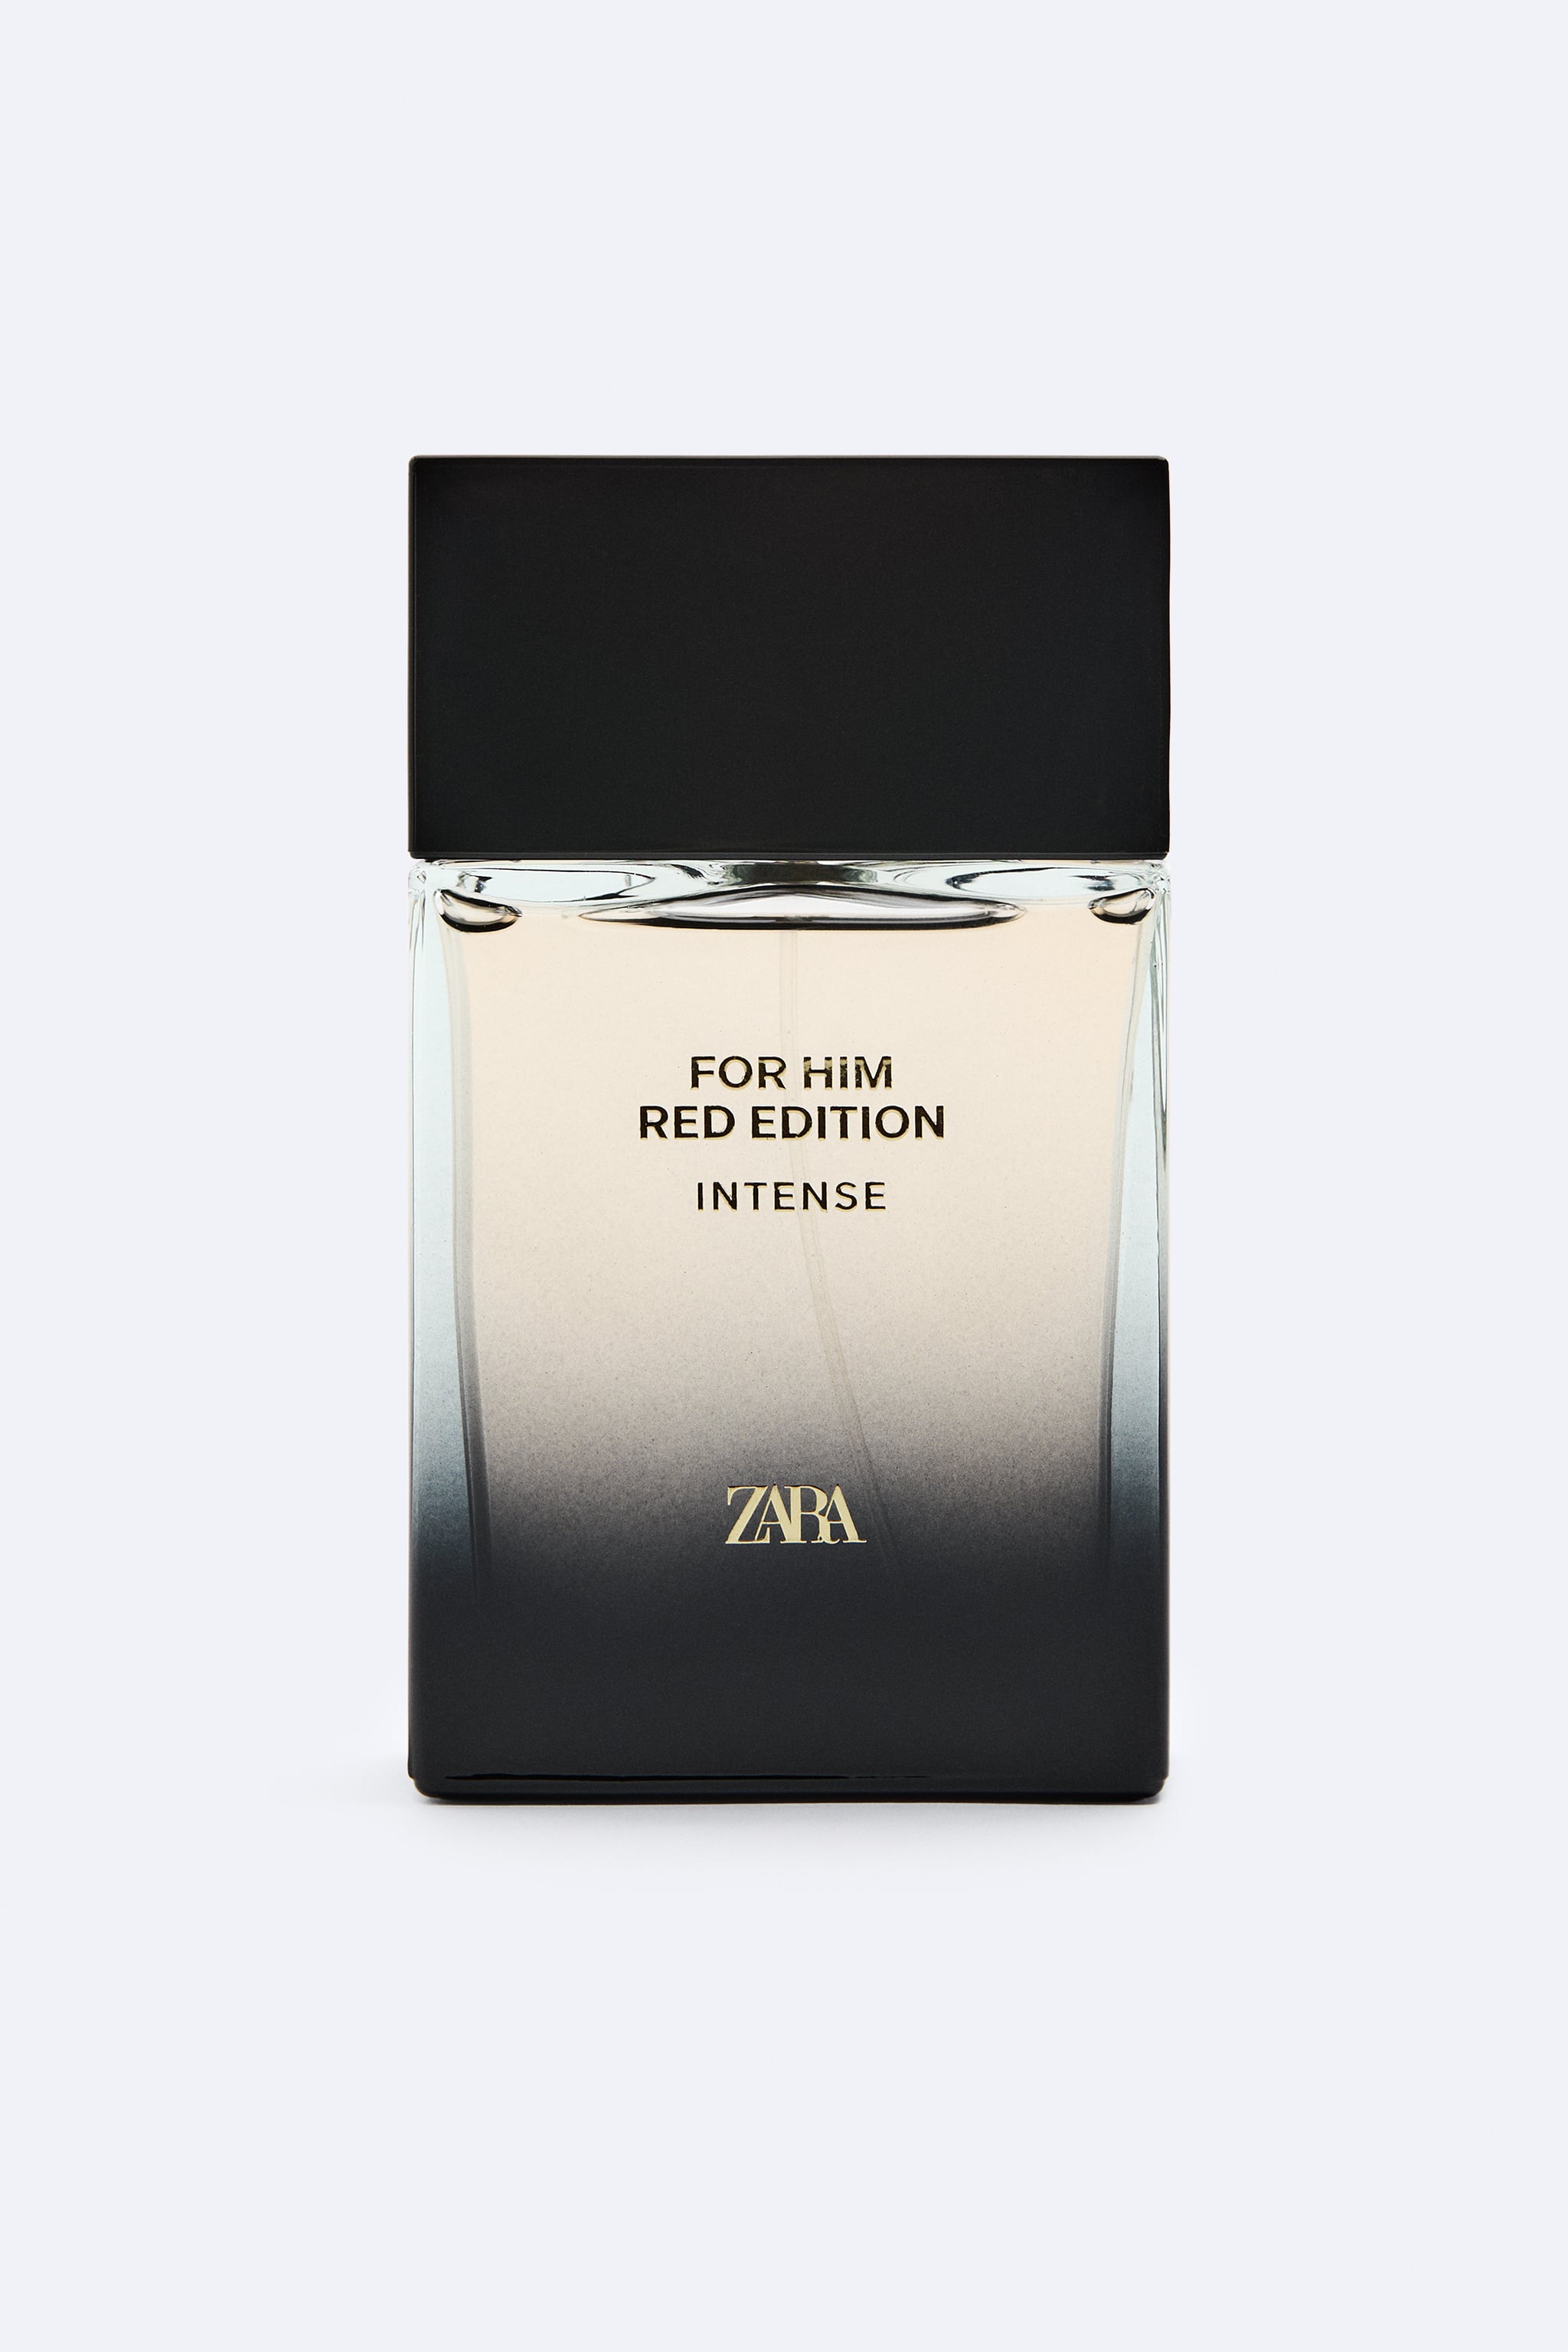 FOR HIM RED EDITION INTENSE PARFUM 100 ML